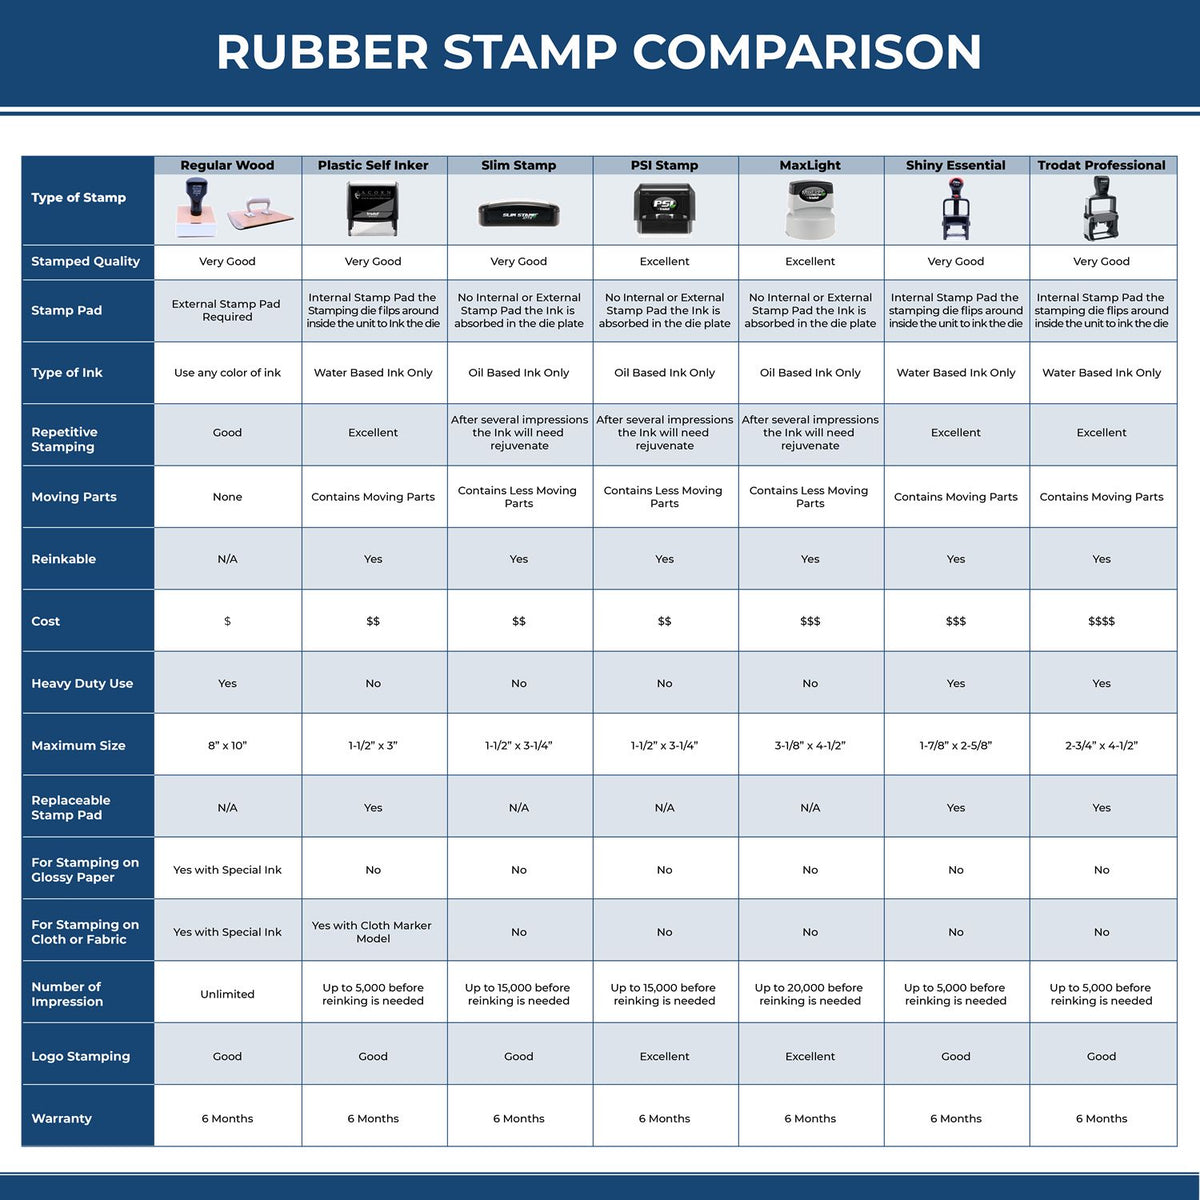 A comparison chart for the different types of mount models available for the Heavy-Duty Massachusetts Rectangular Notary Stamp.